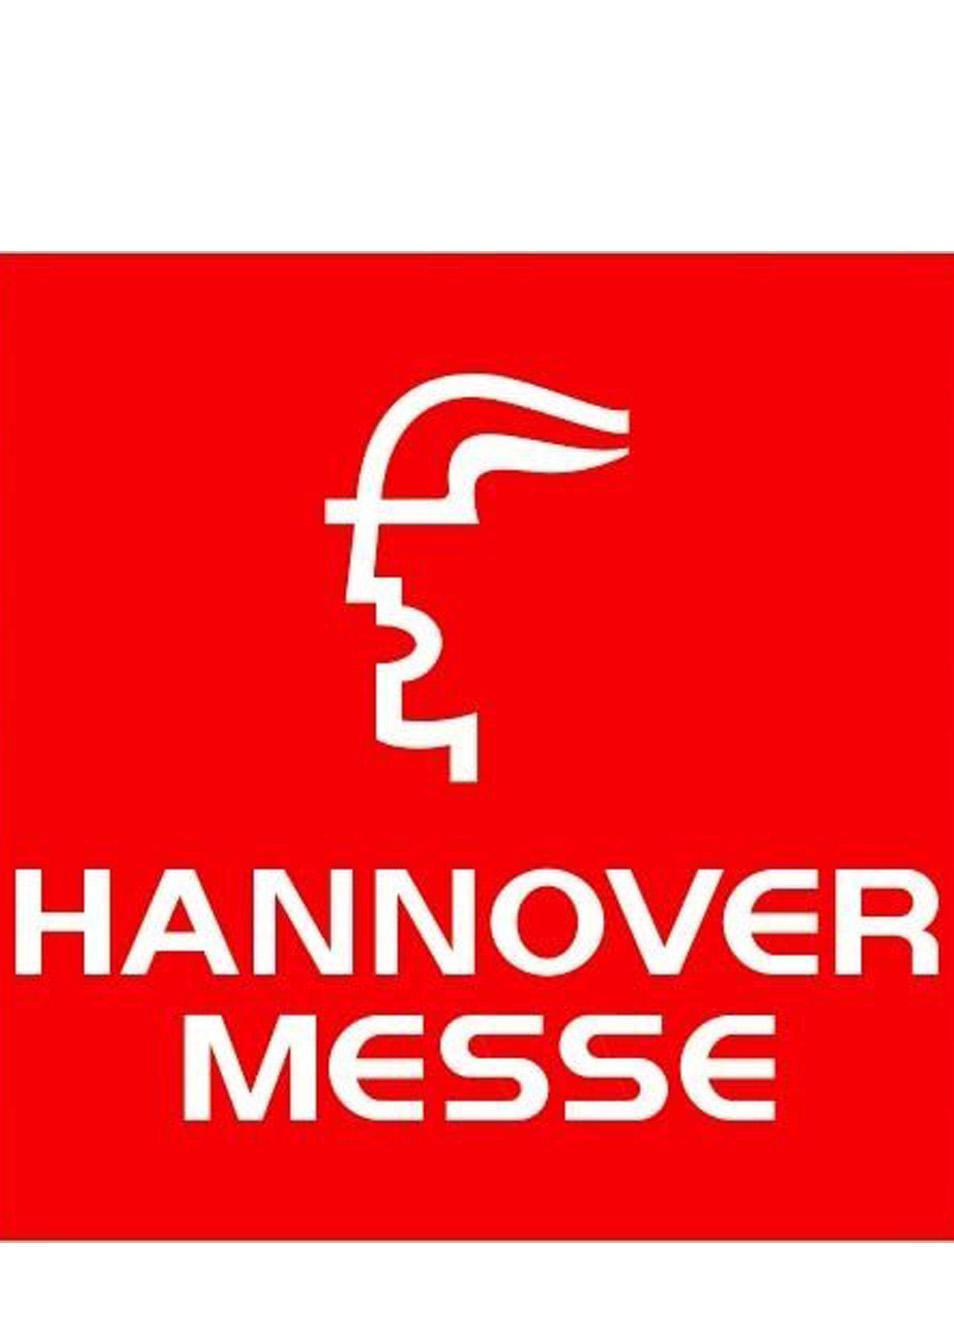 GGB attends 2019 Hannover Messe Industrial Show